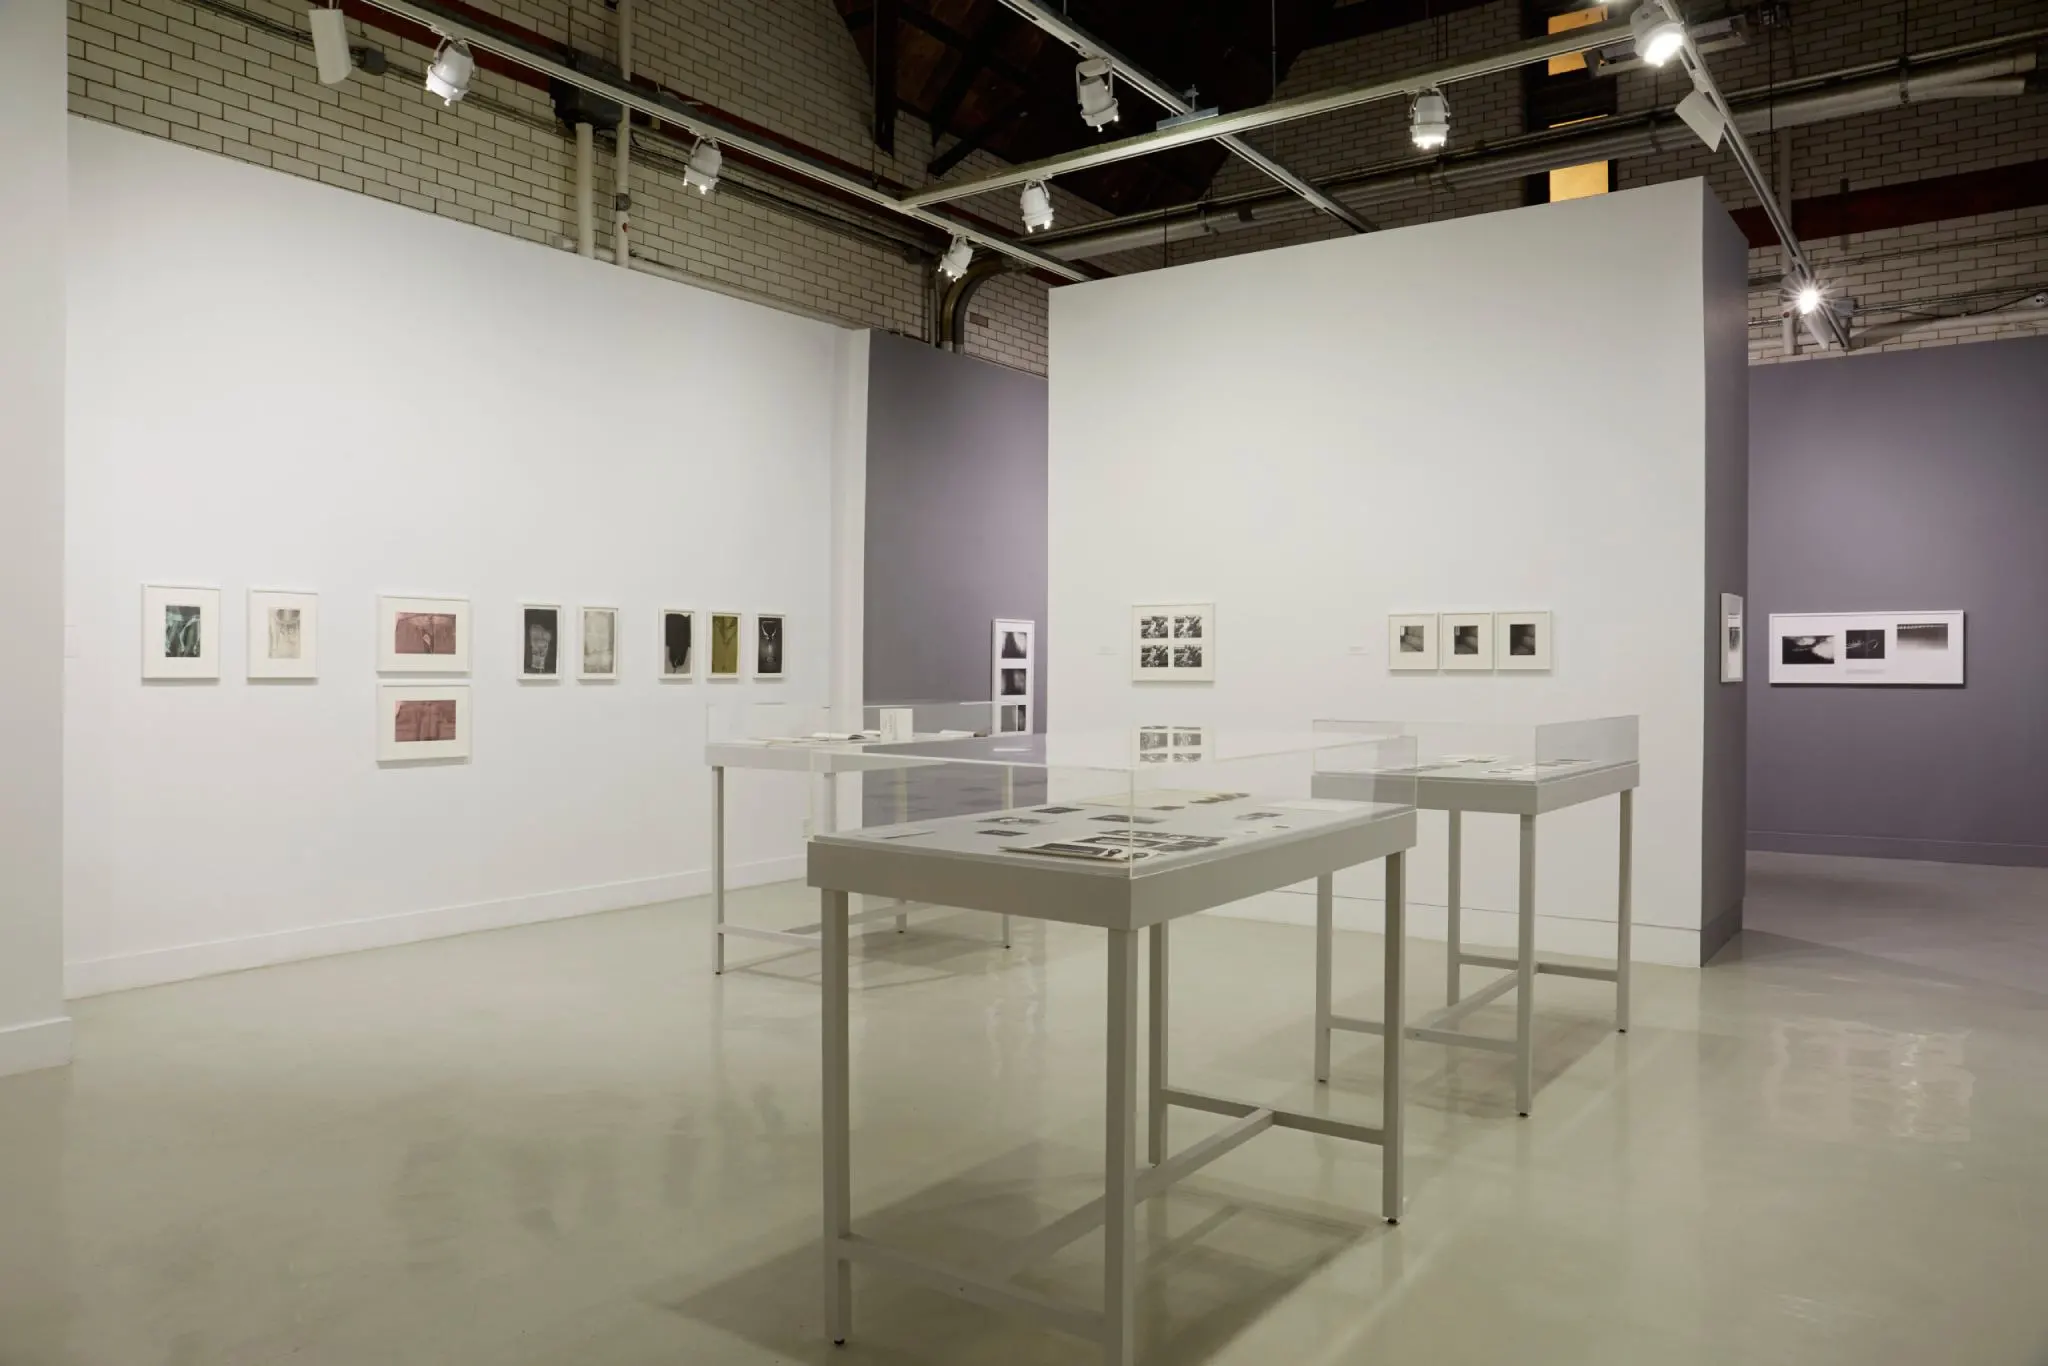 Installation view from Pati Hill: Photocopier - A Survey of Prints and Books (1974 - 83).